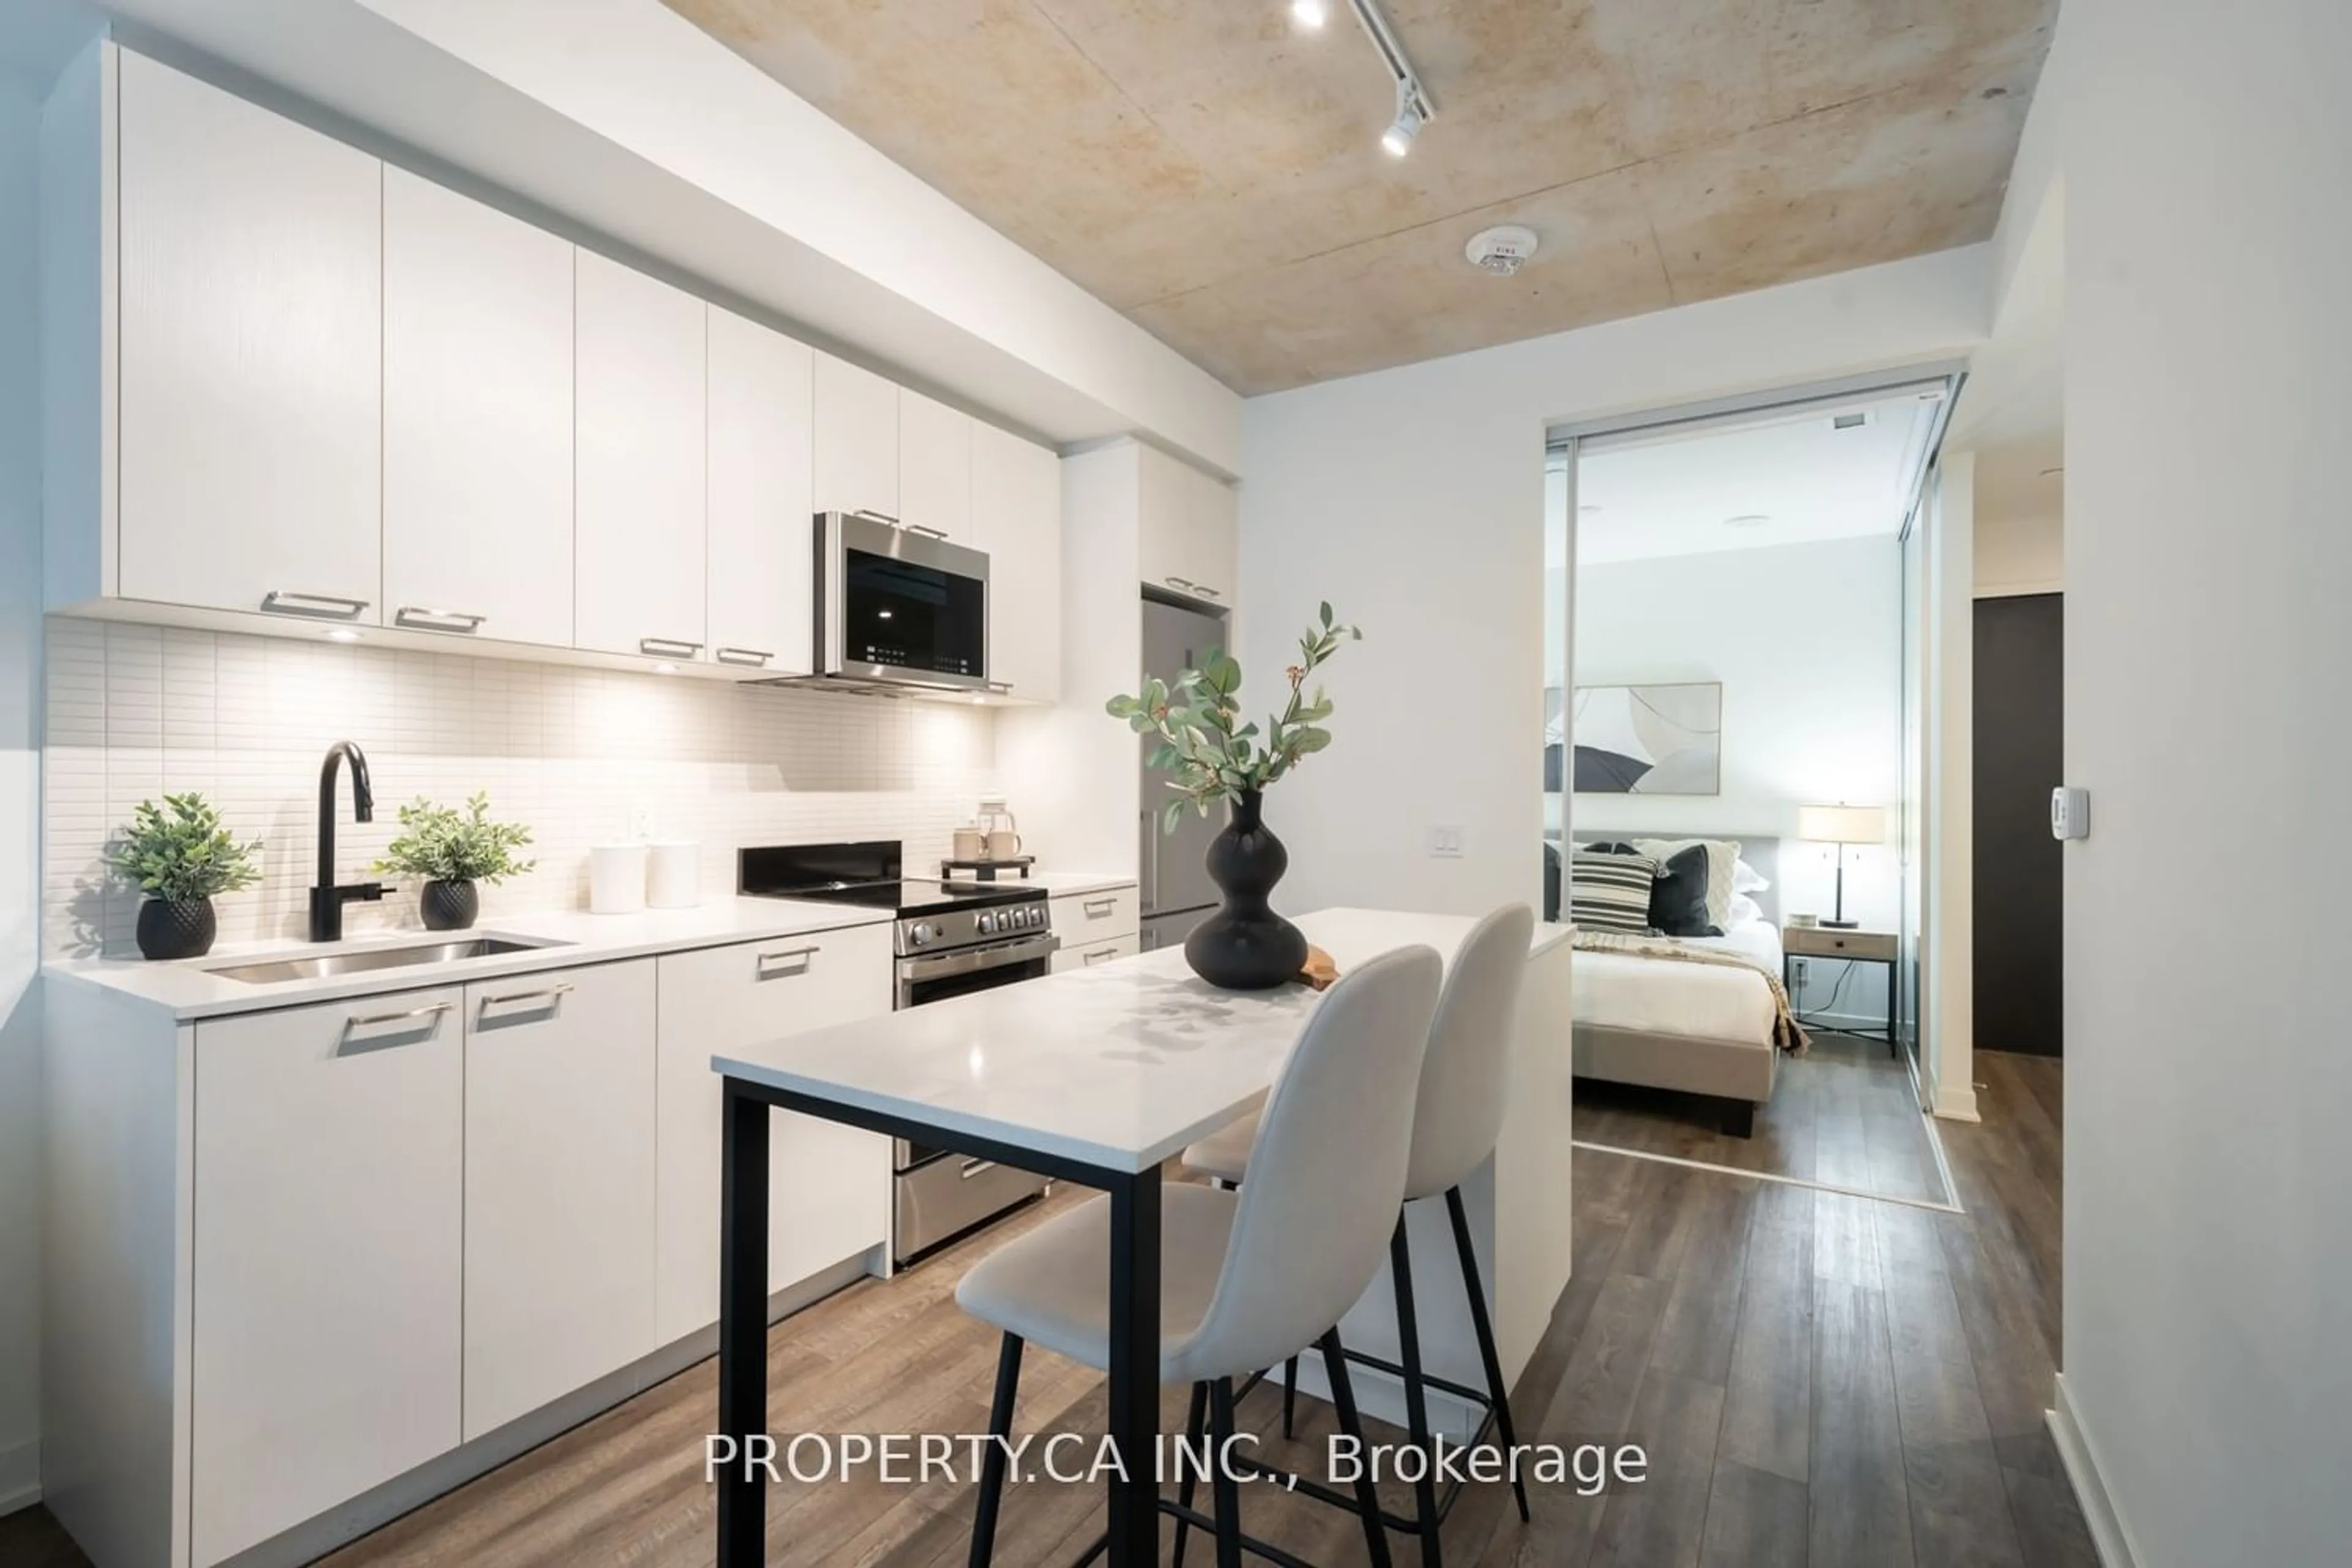 Contemporary kitchen for 1808 St Clair Ave #210, Toronto Ontario M6N 0C1